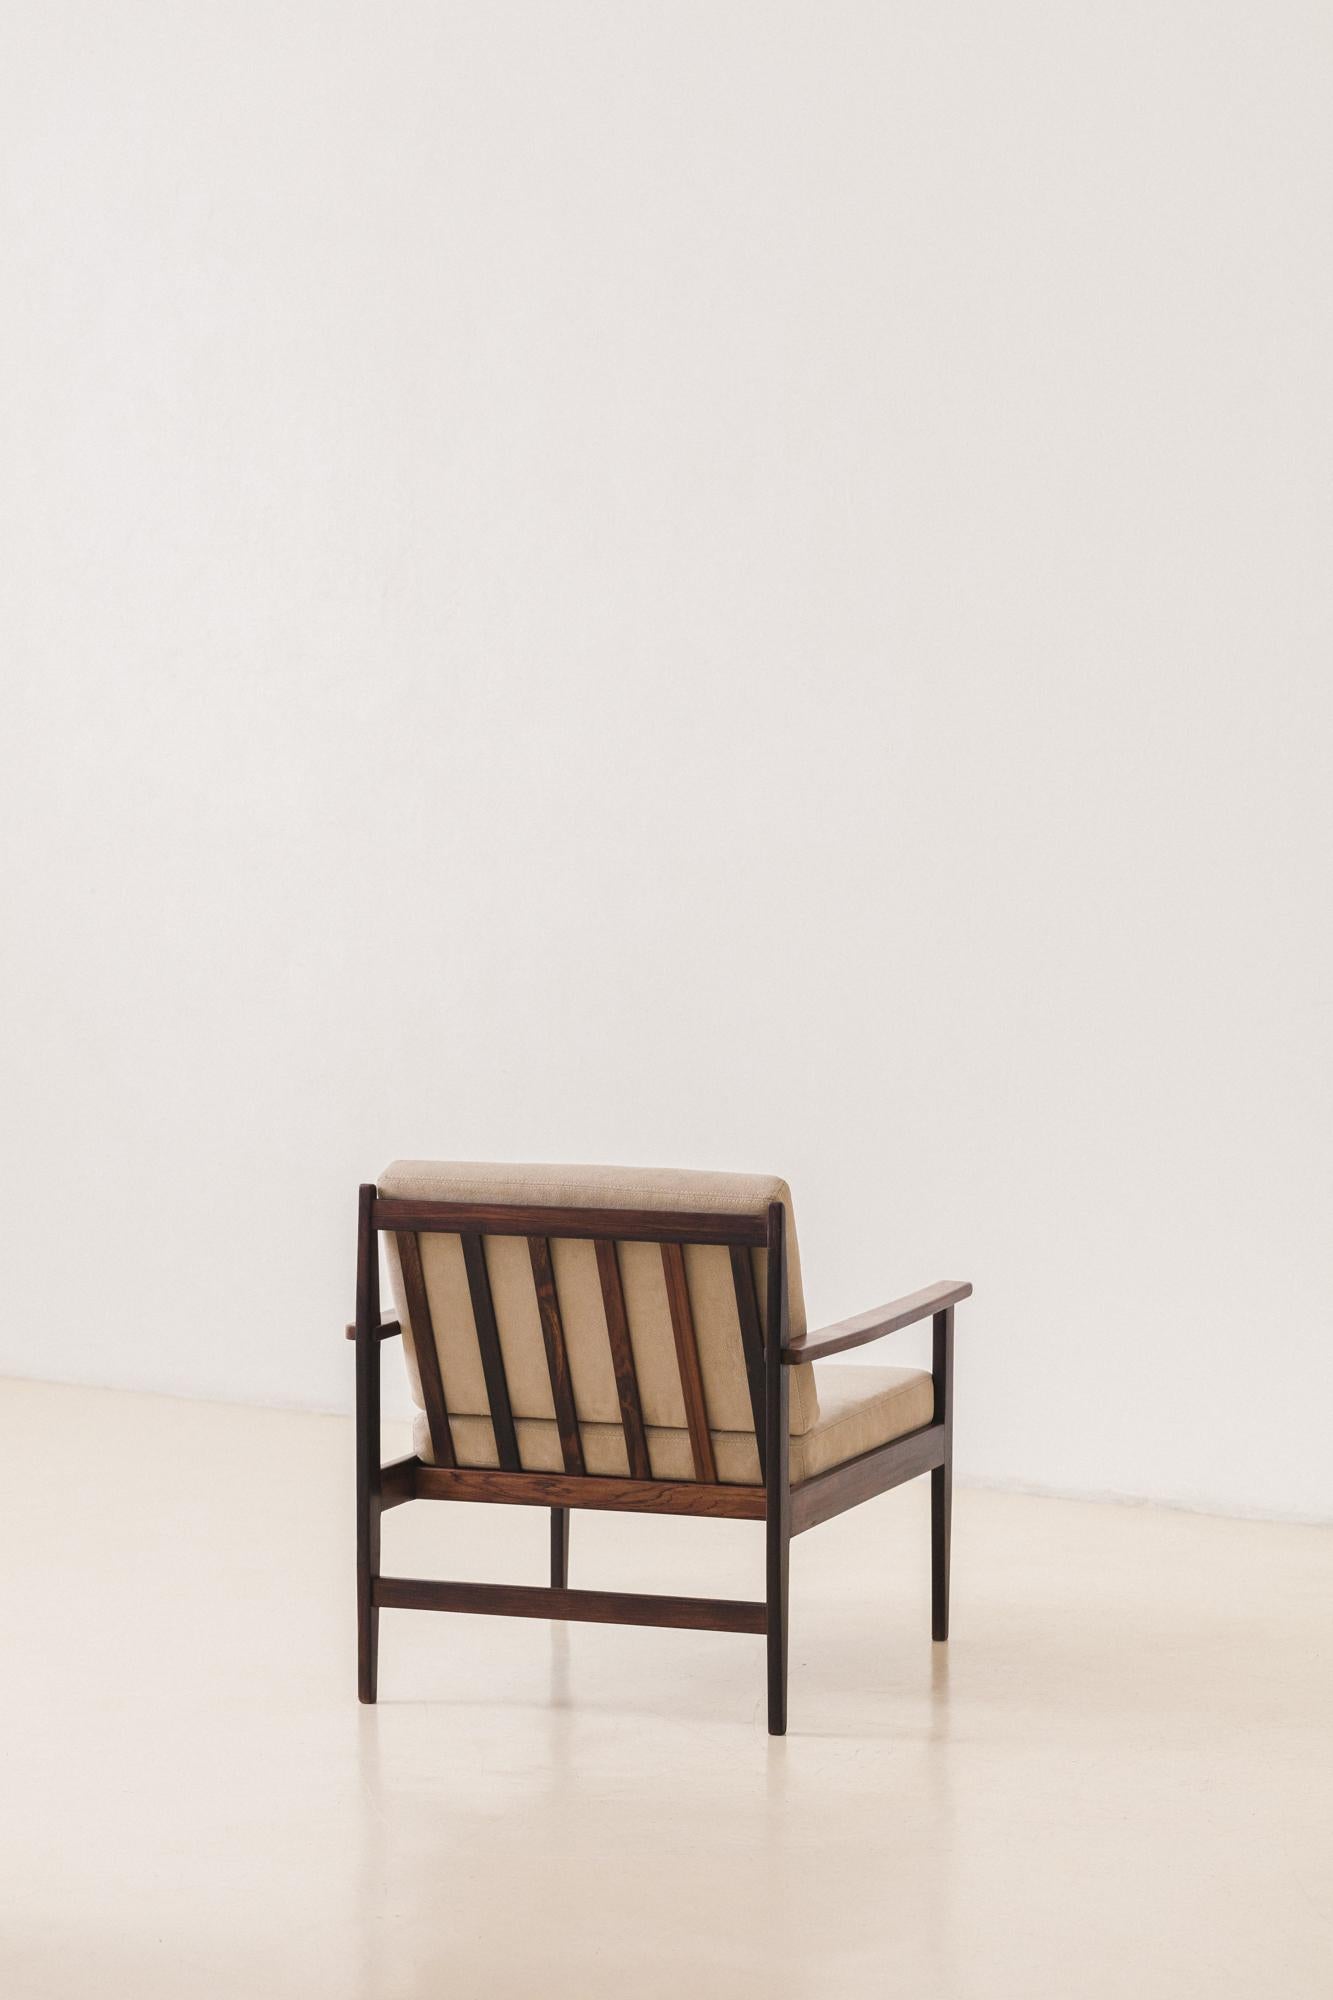 Vintage Rosewood Armchair by Celina Decorações, Brazilian Midcentury, 1960s In Good Condition For Sale In New York, NY